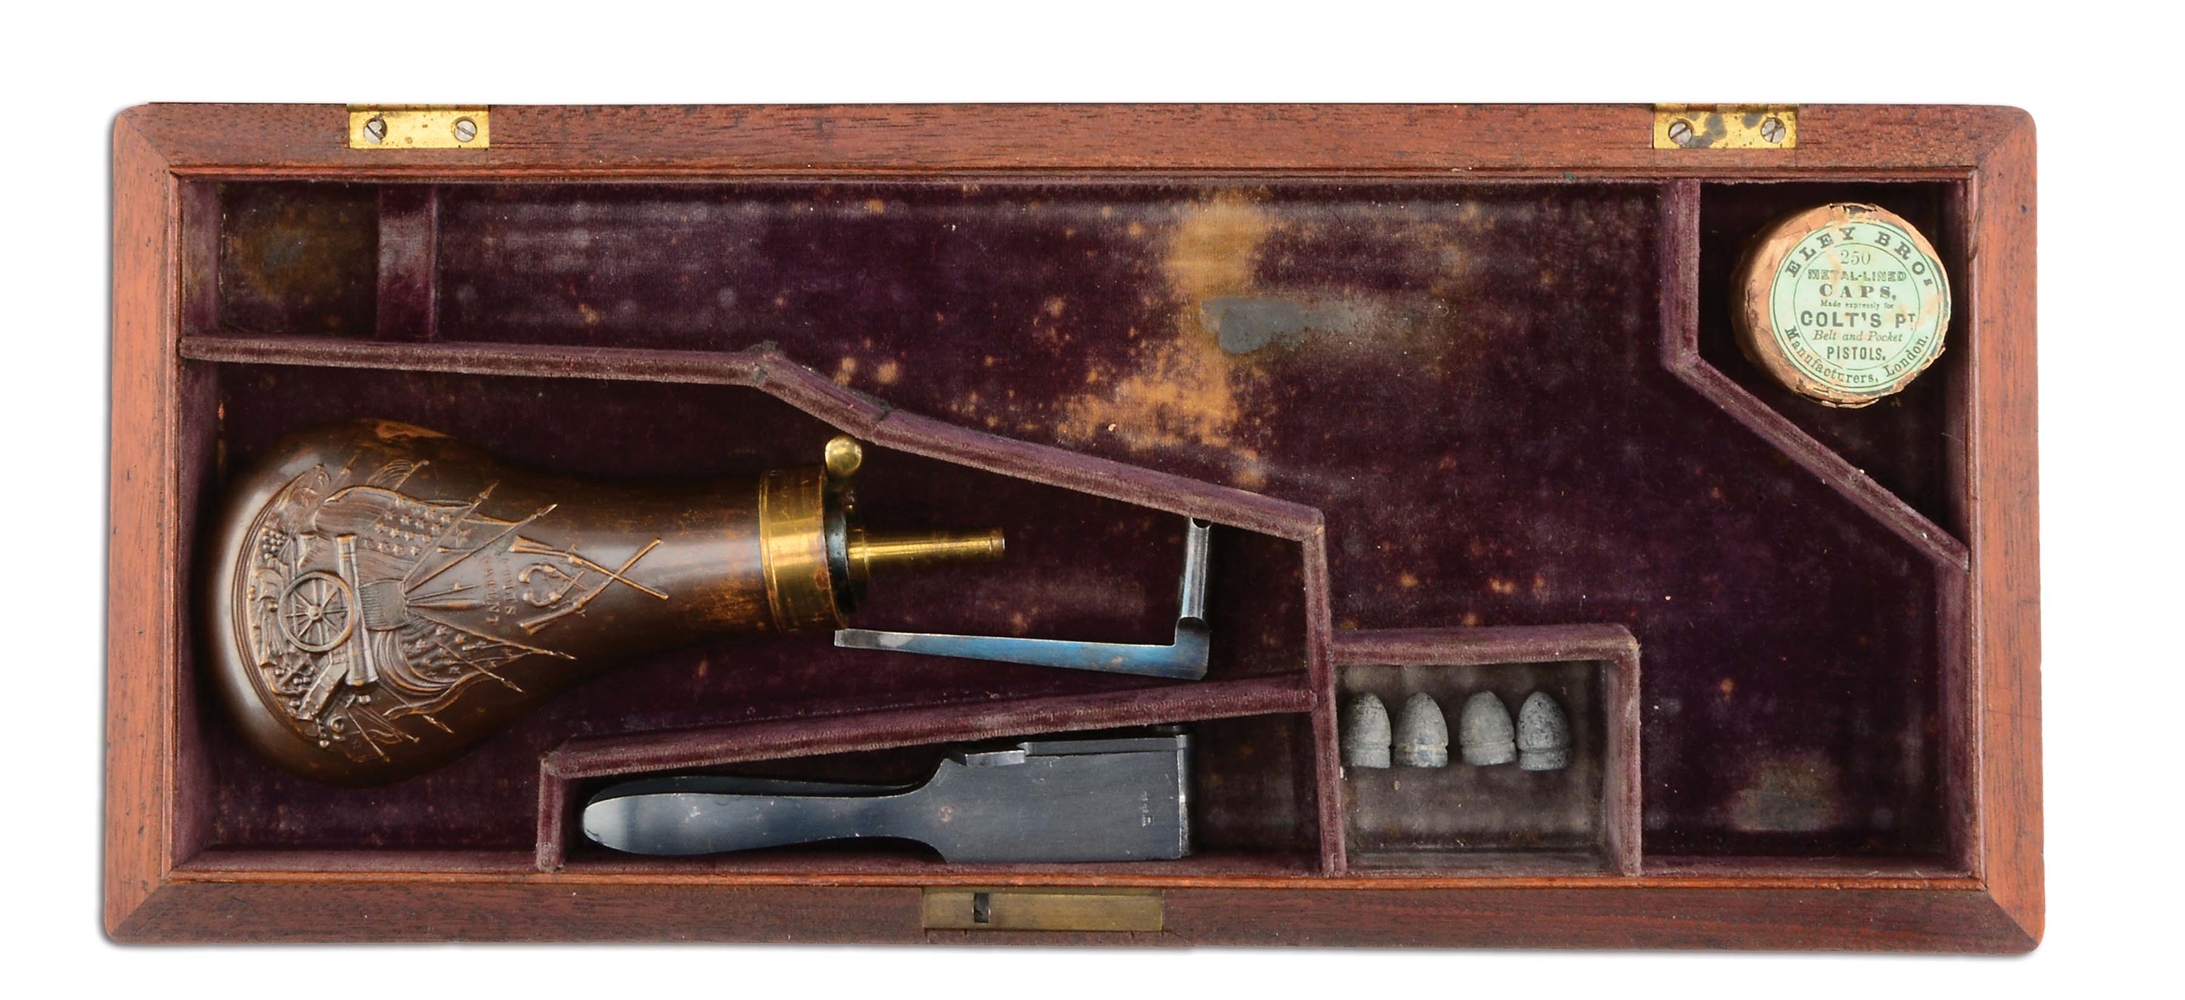 FINE ORIGINAL CASE FOR COLT 1860 ARMY WITH BULLET MOLD, COLTS PATENT FLASK, SCREWDRIVER & ELEYS CAPS TIN.